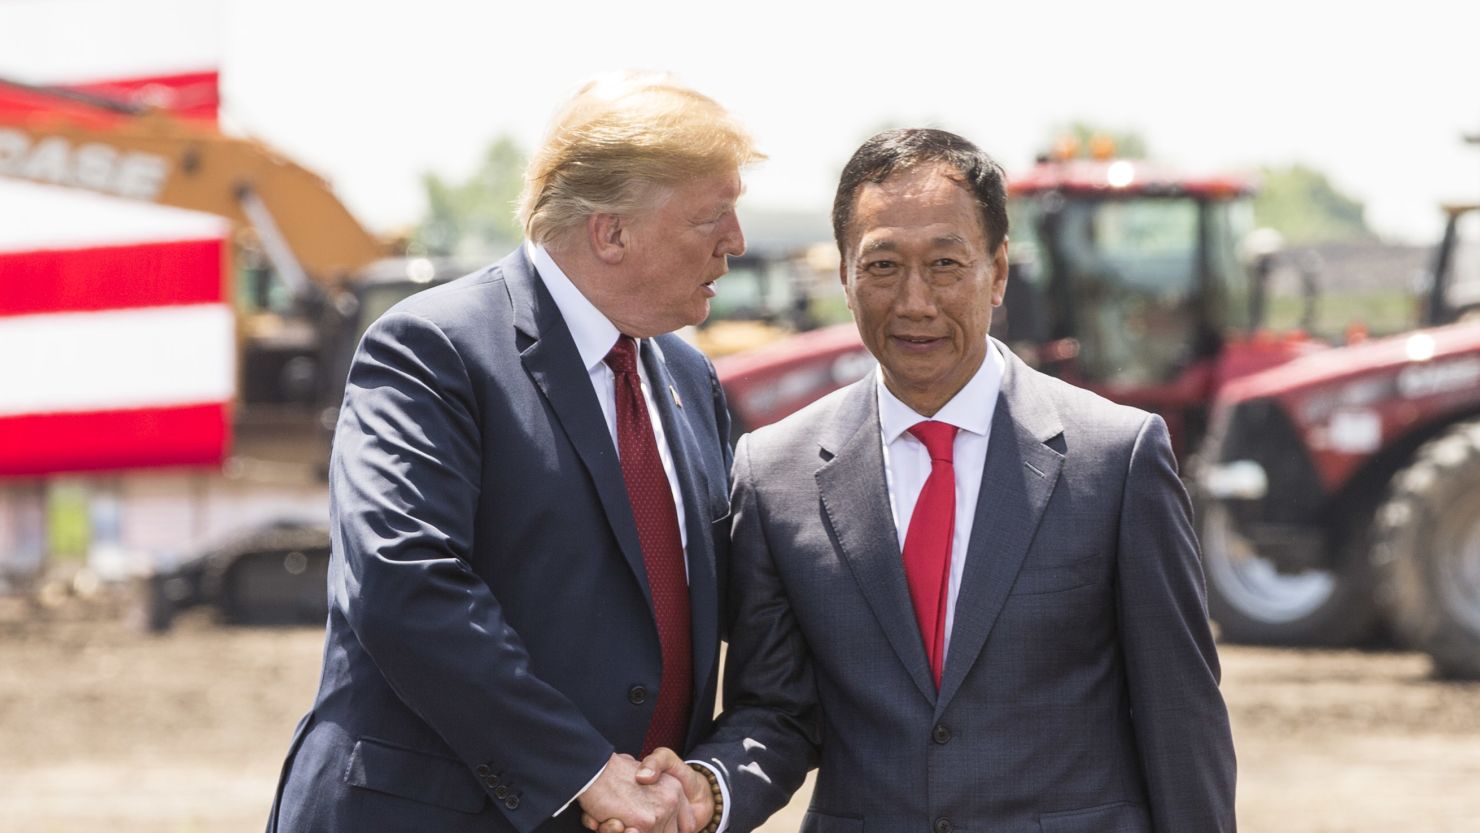 US President Donald Trump, left, shakes hands with Foxconn CEO Terry Gou at the groundbreaking for the Foxconn Technology Group computer screen plant on June 28, 2018 in Mt Pleasant, Wisconsin. 